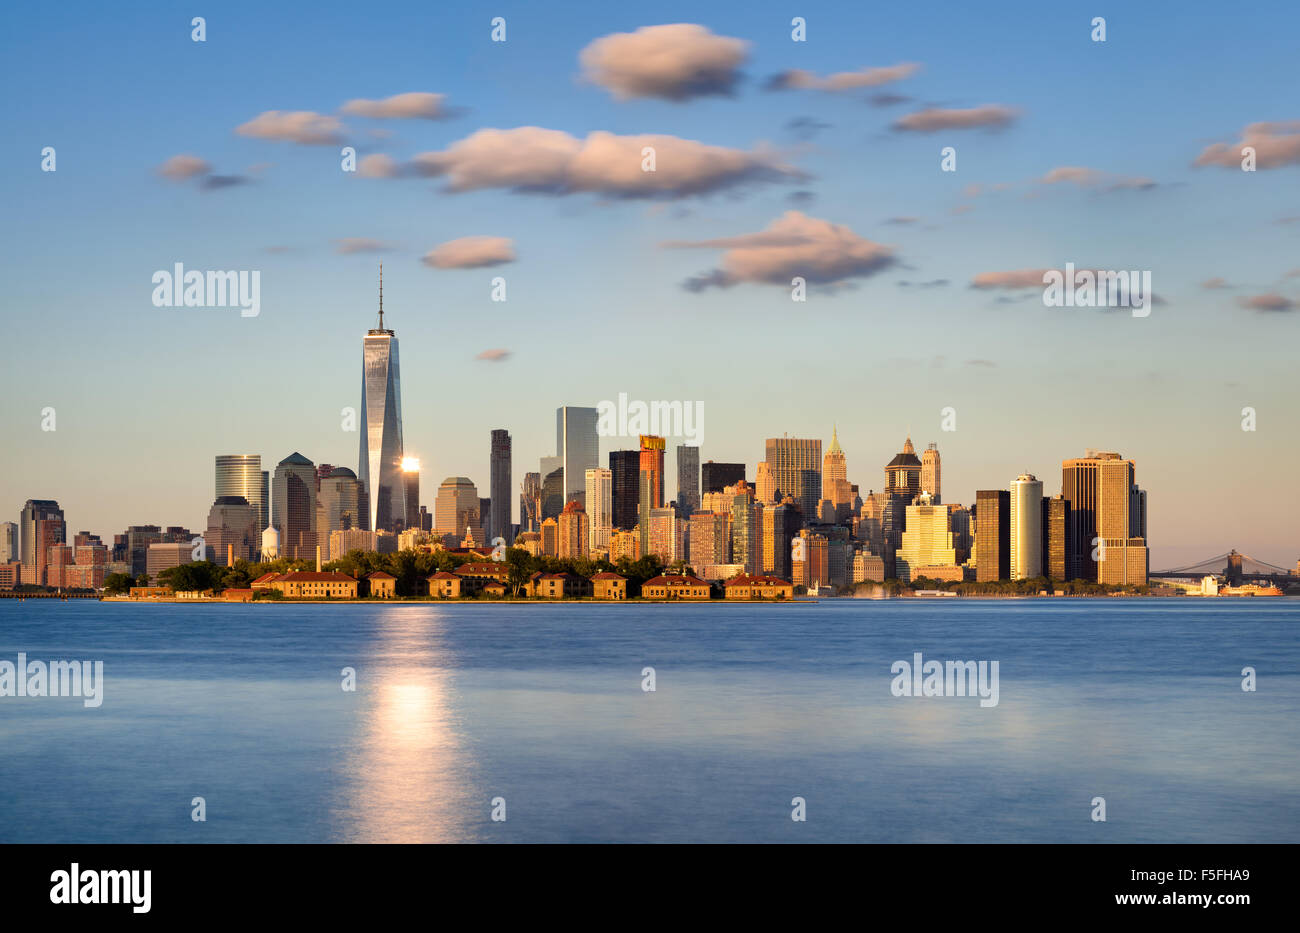 Skyline of New York City, Lower Manhattan. Ellis Island appears in front of the Financial District’s skyscrapers Stock Photo